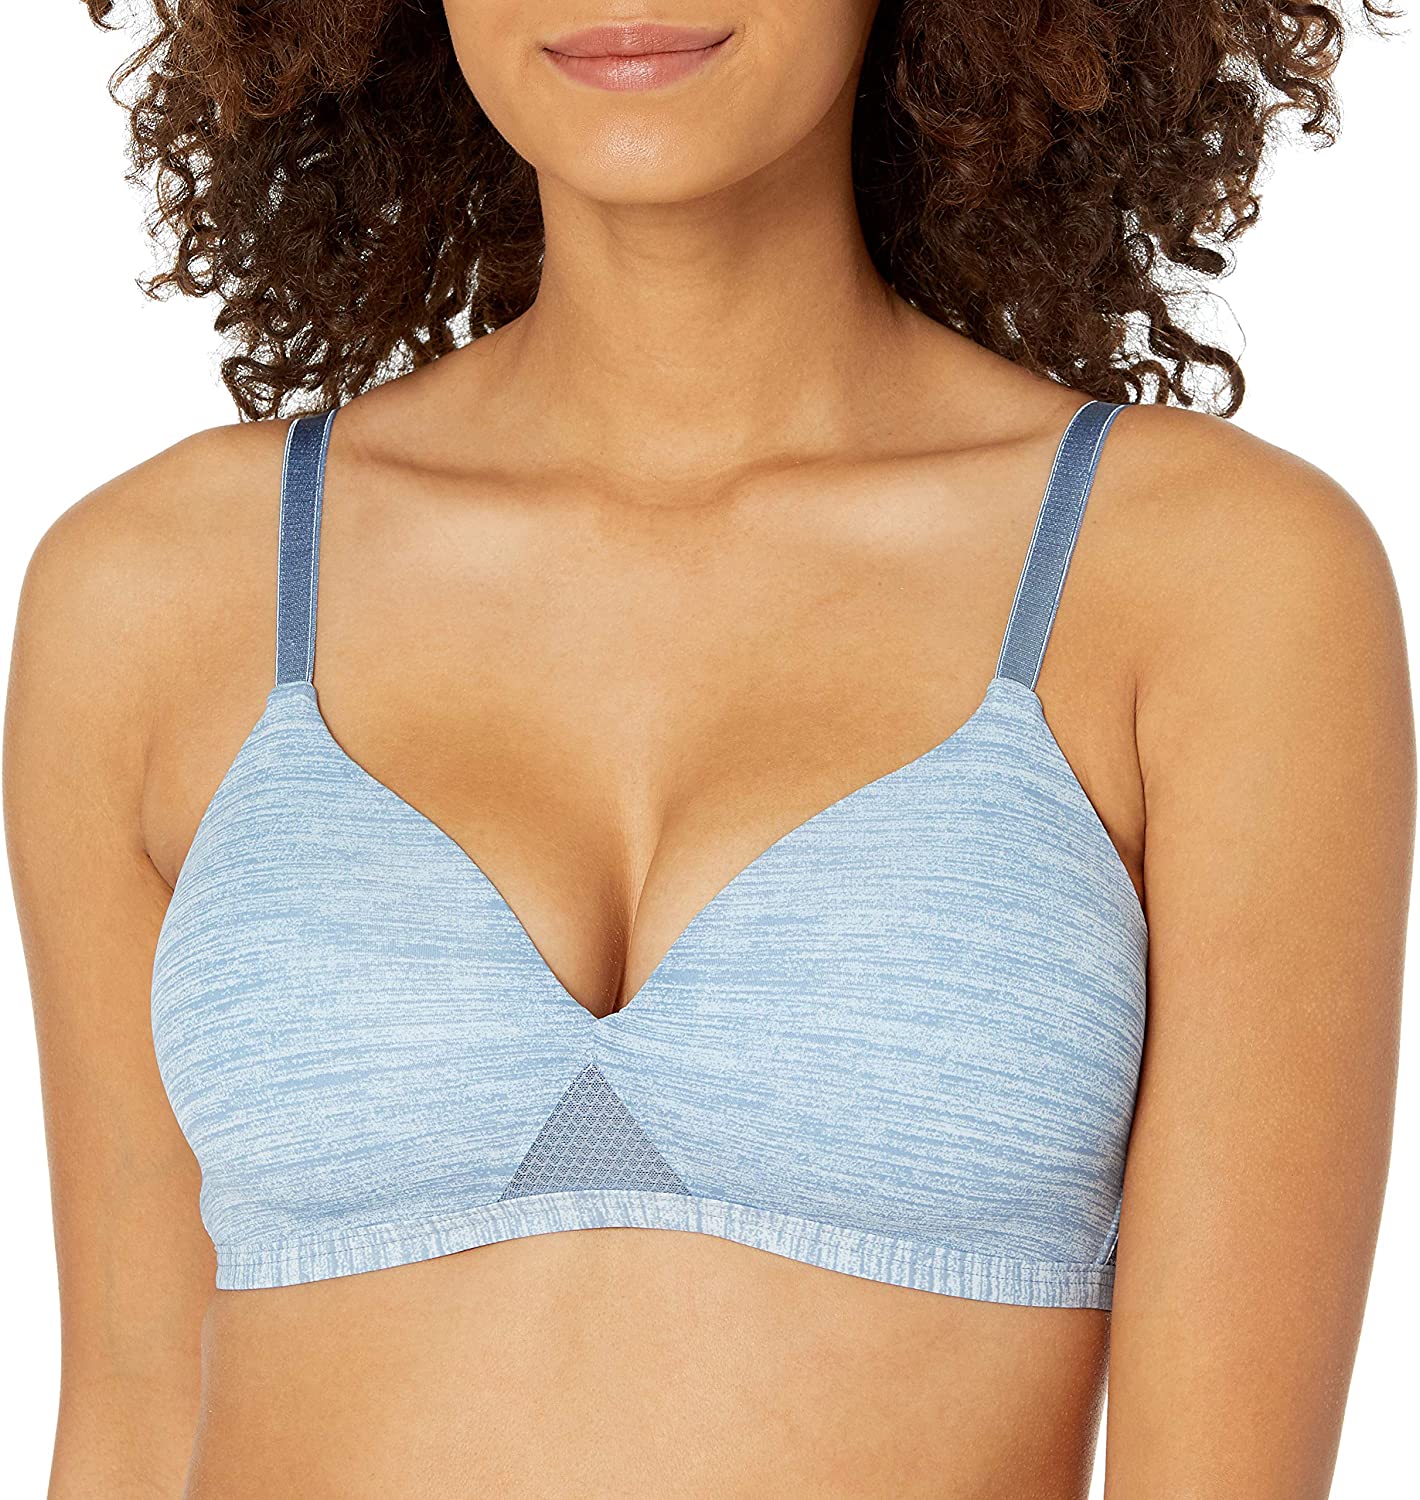 Best Cool Padded Perfekt for a Small Chest 7 Best Padded Bras to get a Small Chest - Bust-Boosters & Natural Shapes! inch class=